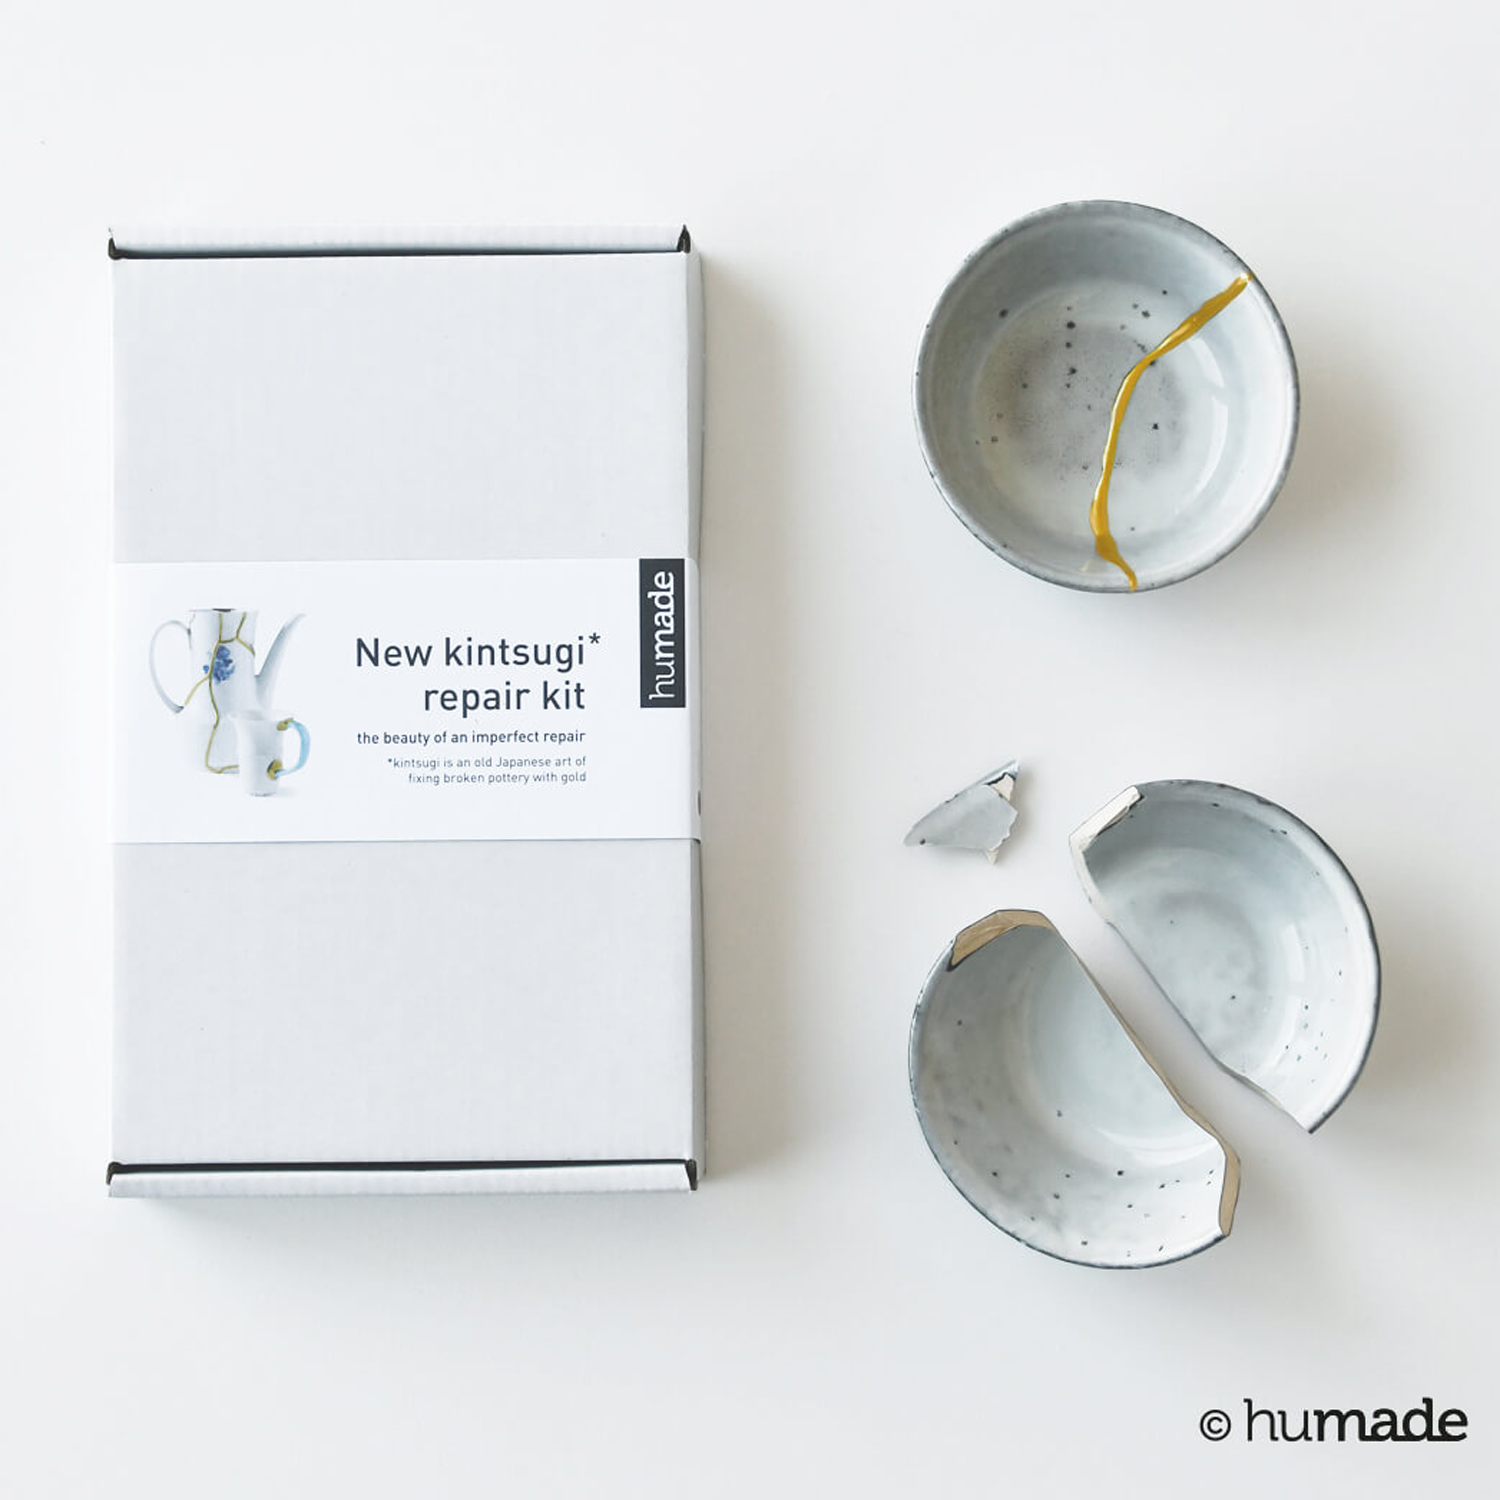 Humade: Kintsugi Kit in Copper Product Image 1 of 4